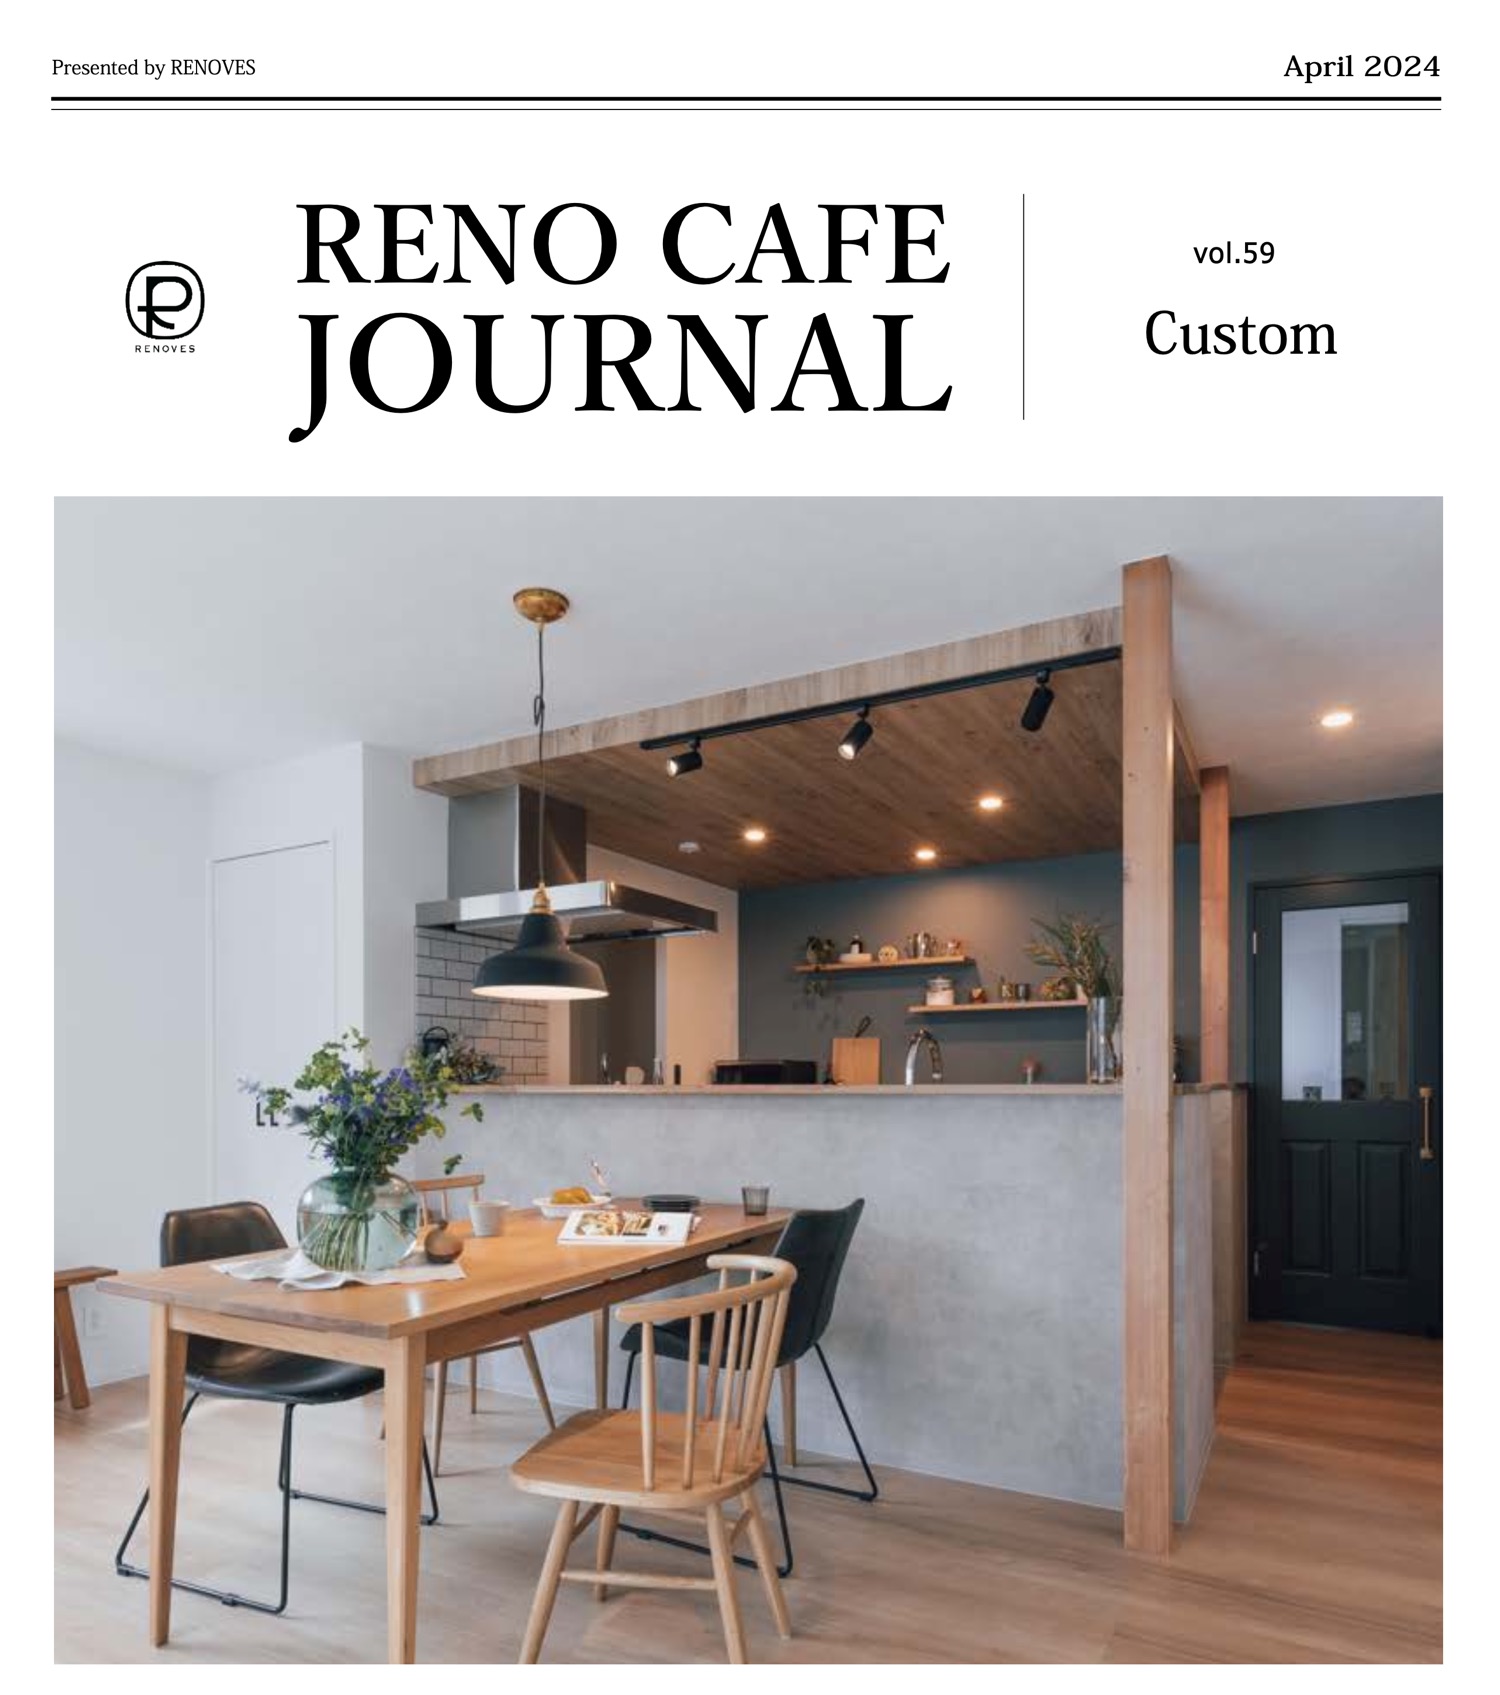 RENO CAFE JOURNAL 最新号をアップしました